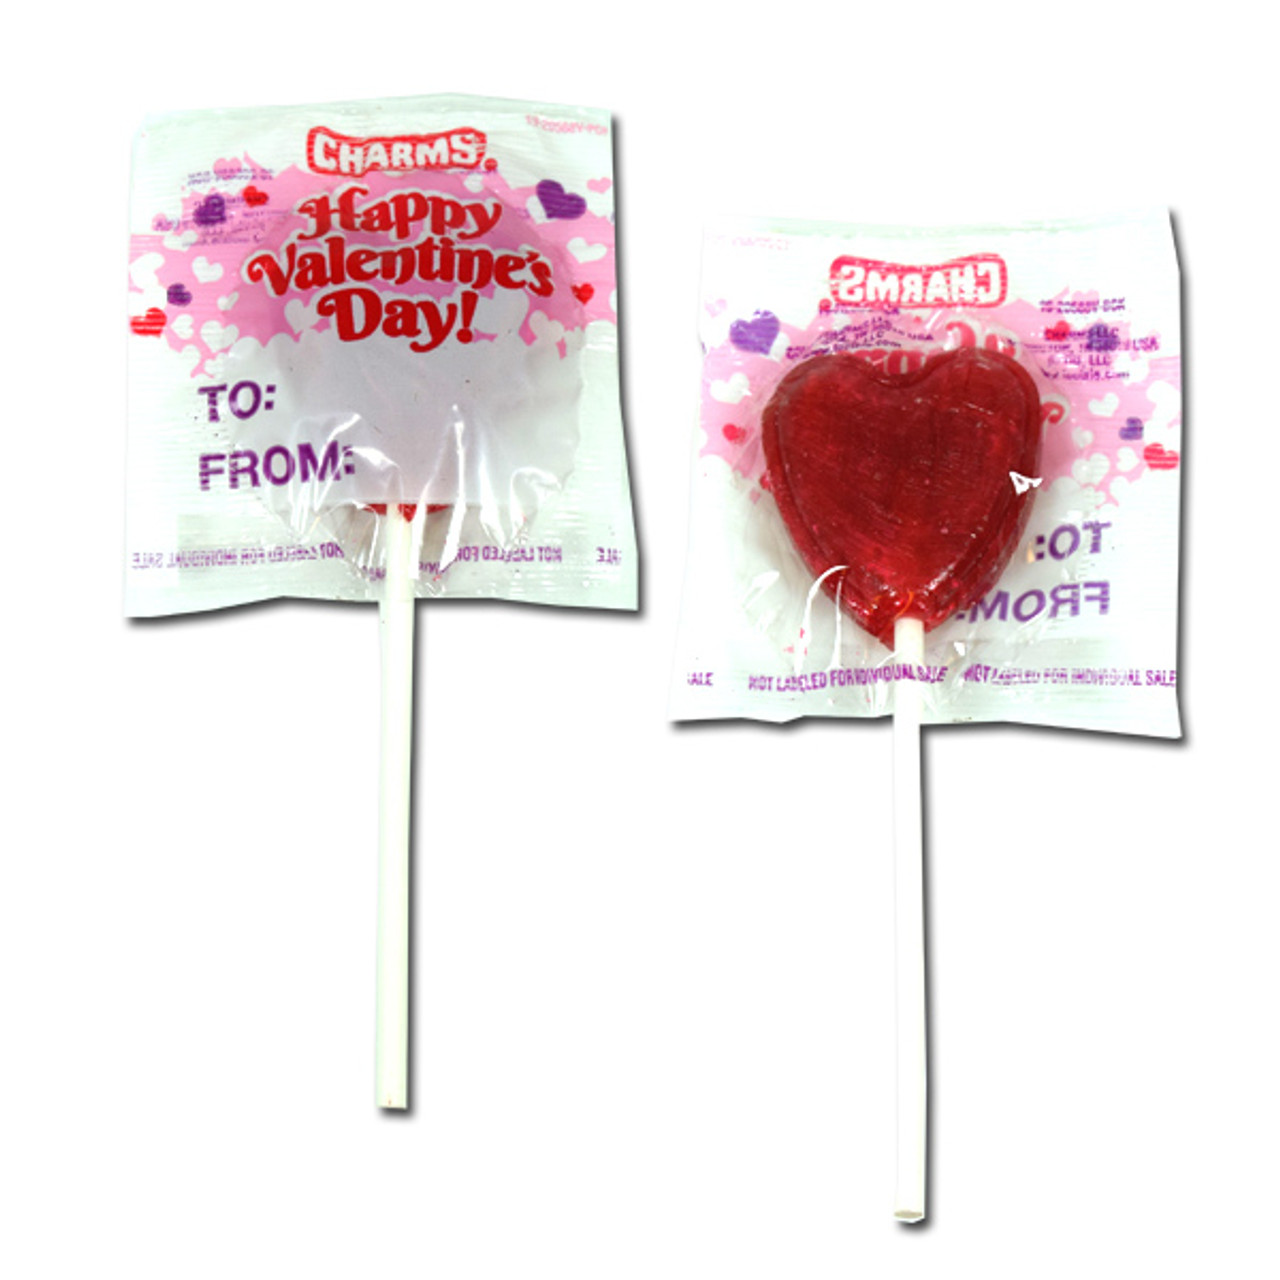  Charms Cherry Valentine Pops 25 count Bag - 2 Pack